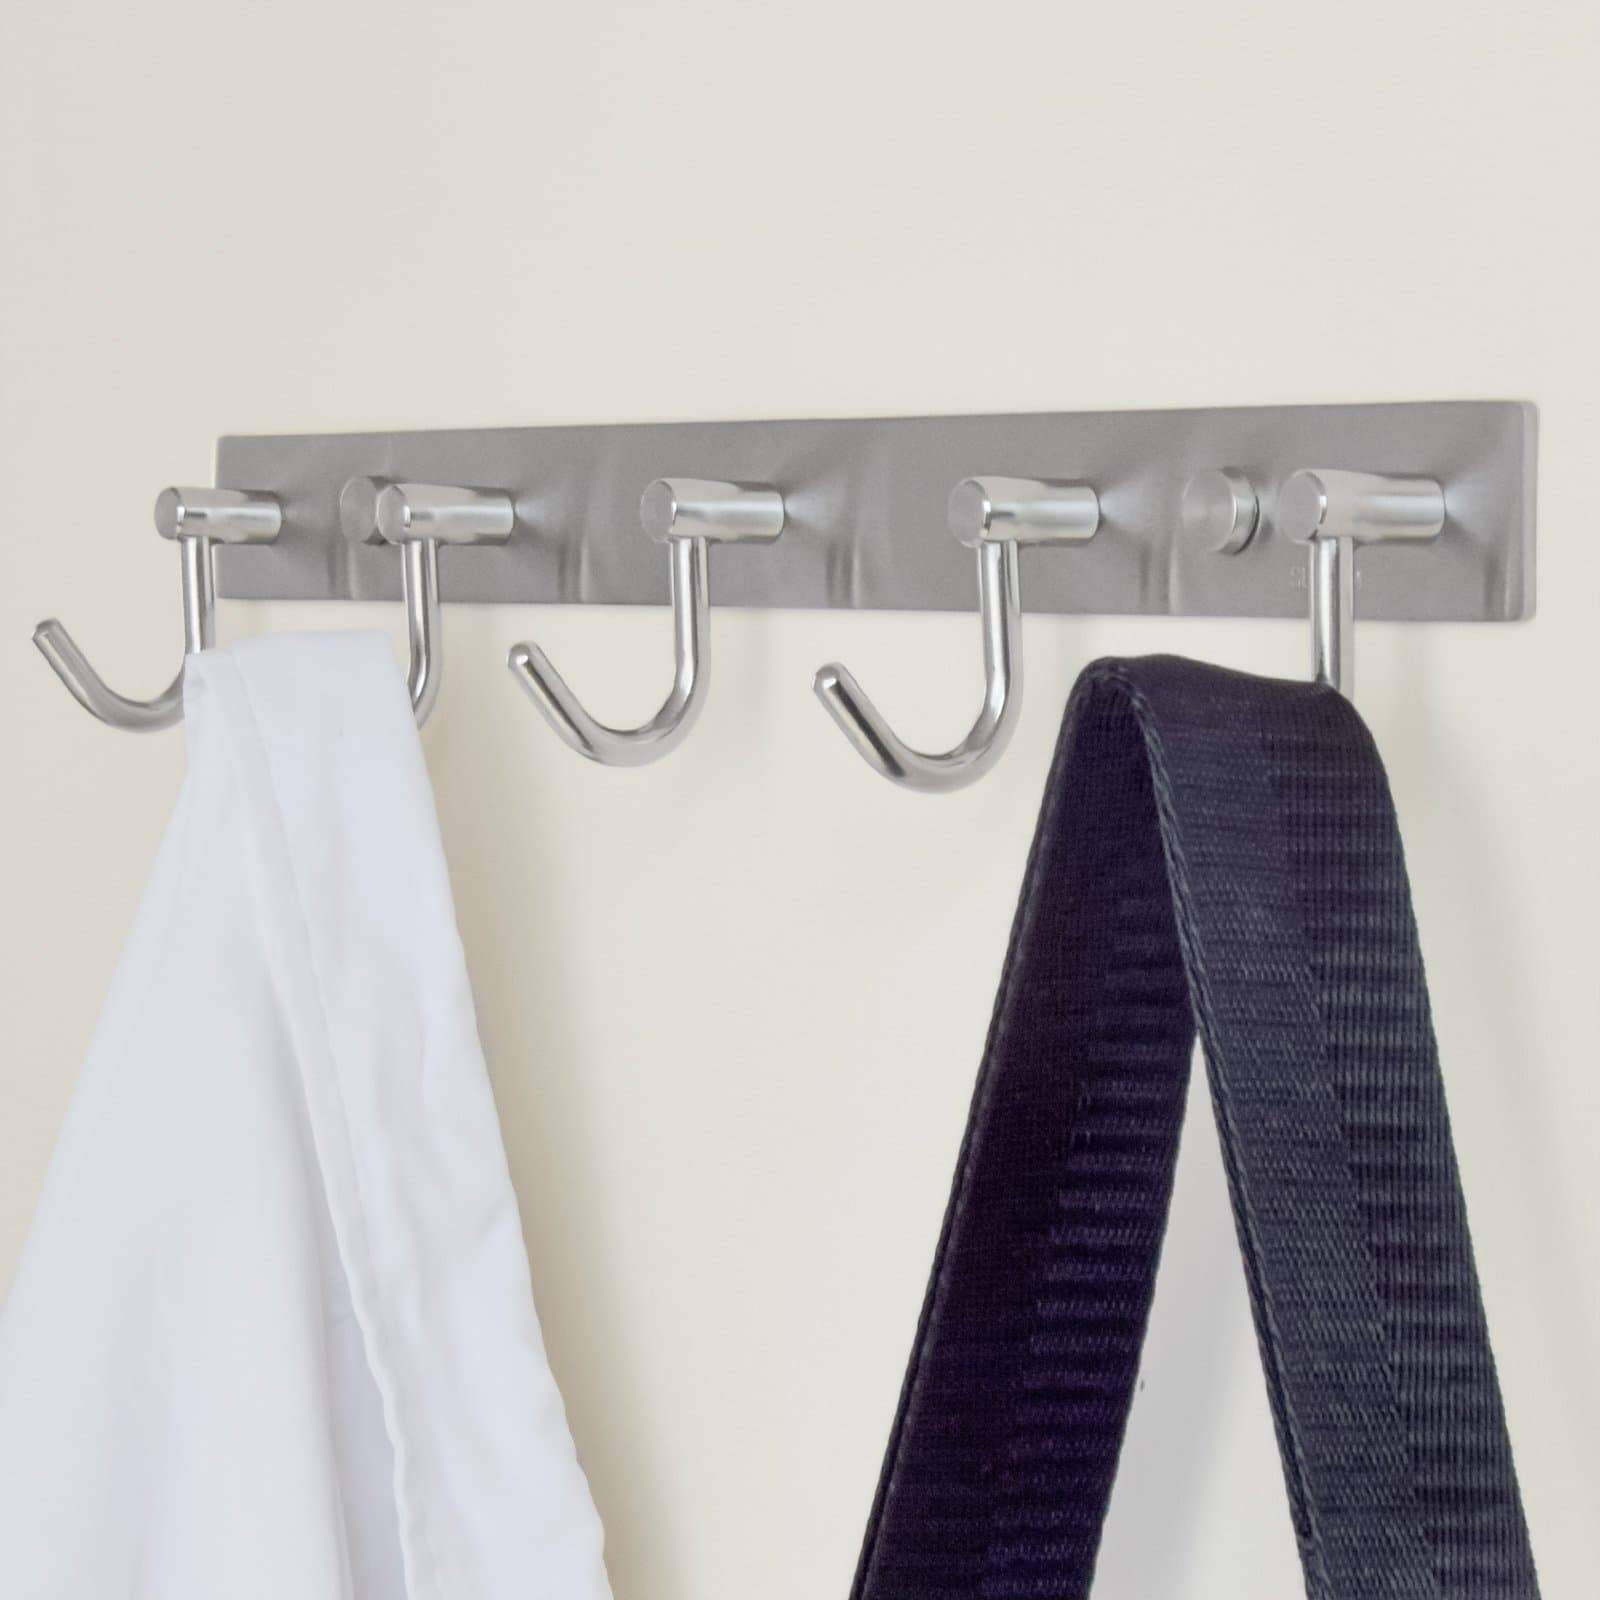 Selection arks royal wall coat hooks solid stainless steel hanger rail durable hook rack for clothes bags or keys brushed stainless steel finish 8 hooks